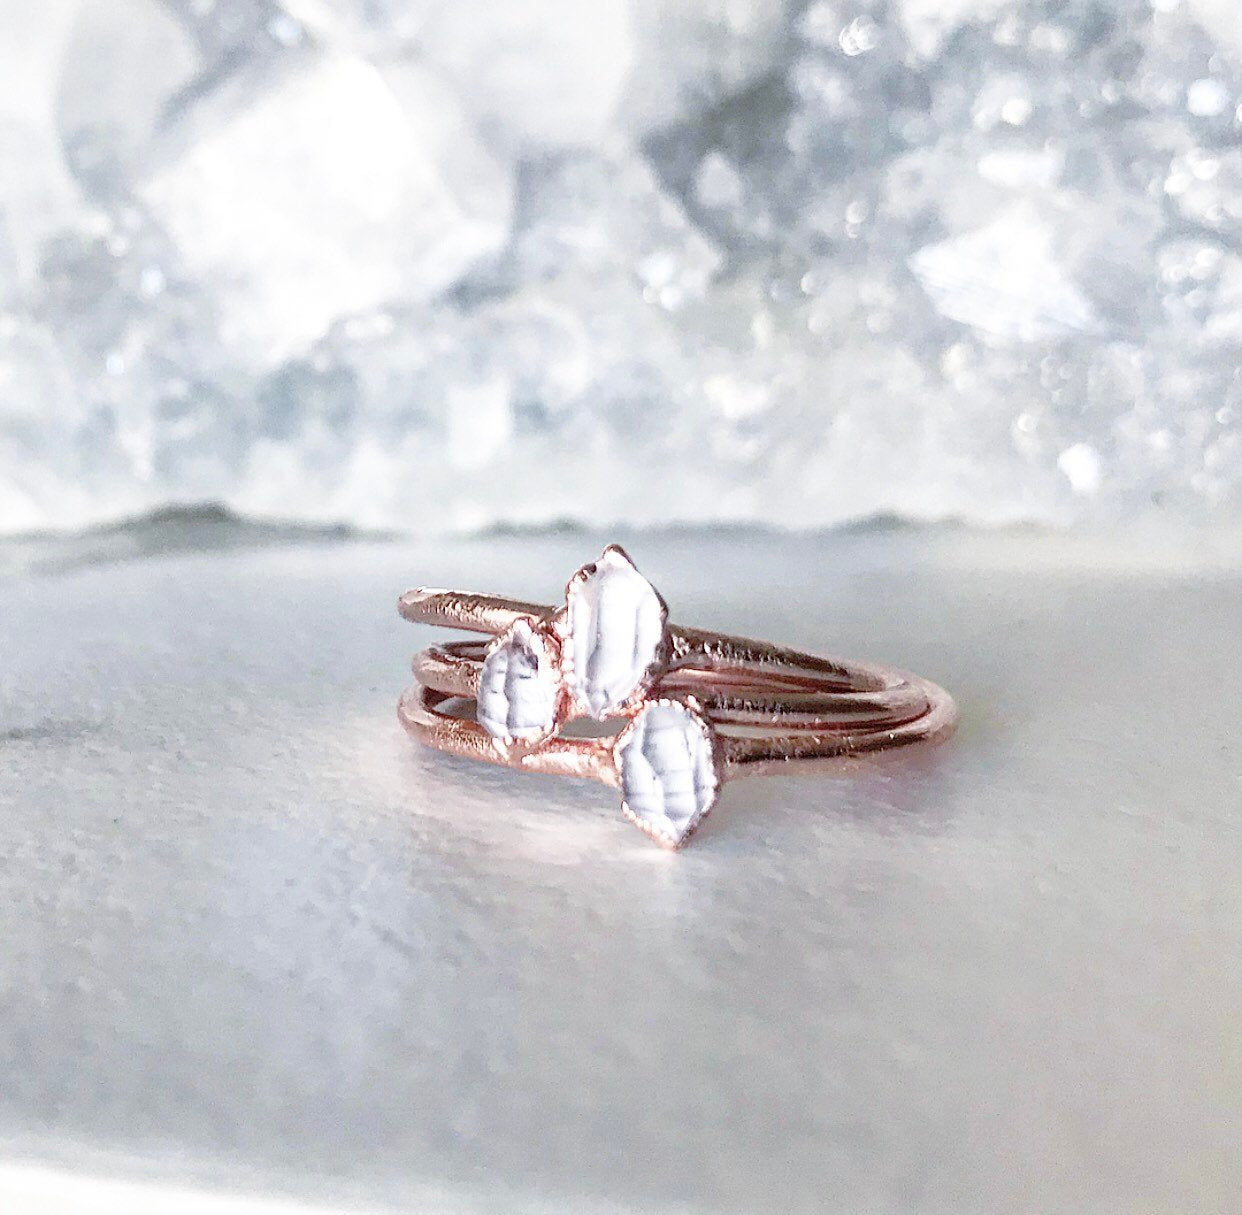 Dainty Herkimer Diamond Ring, Delicate Crystal Ring, Alternative Engagement Ring, Tiny Stone Ring, April Birthstone Gift, Crystal Wedding